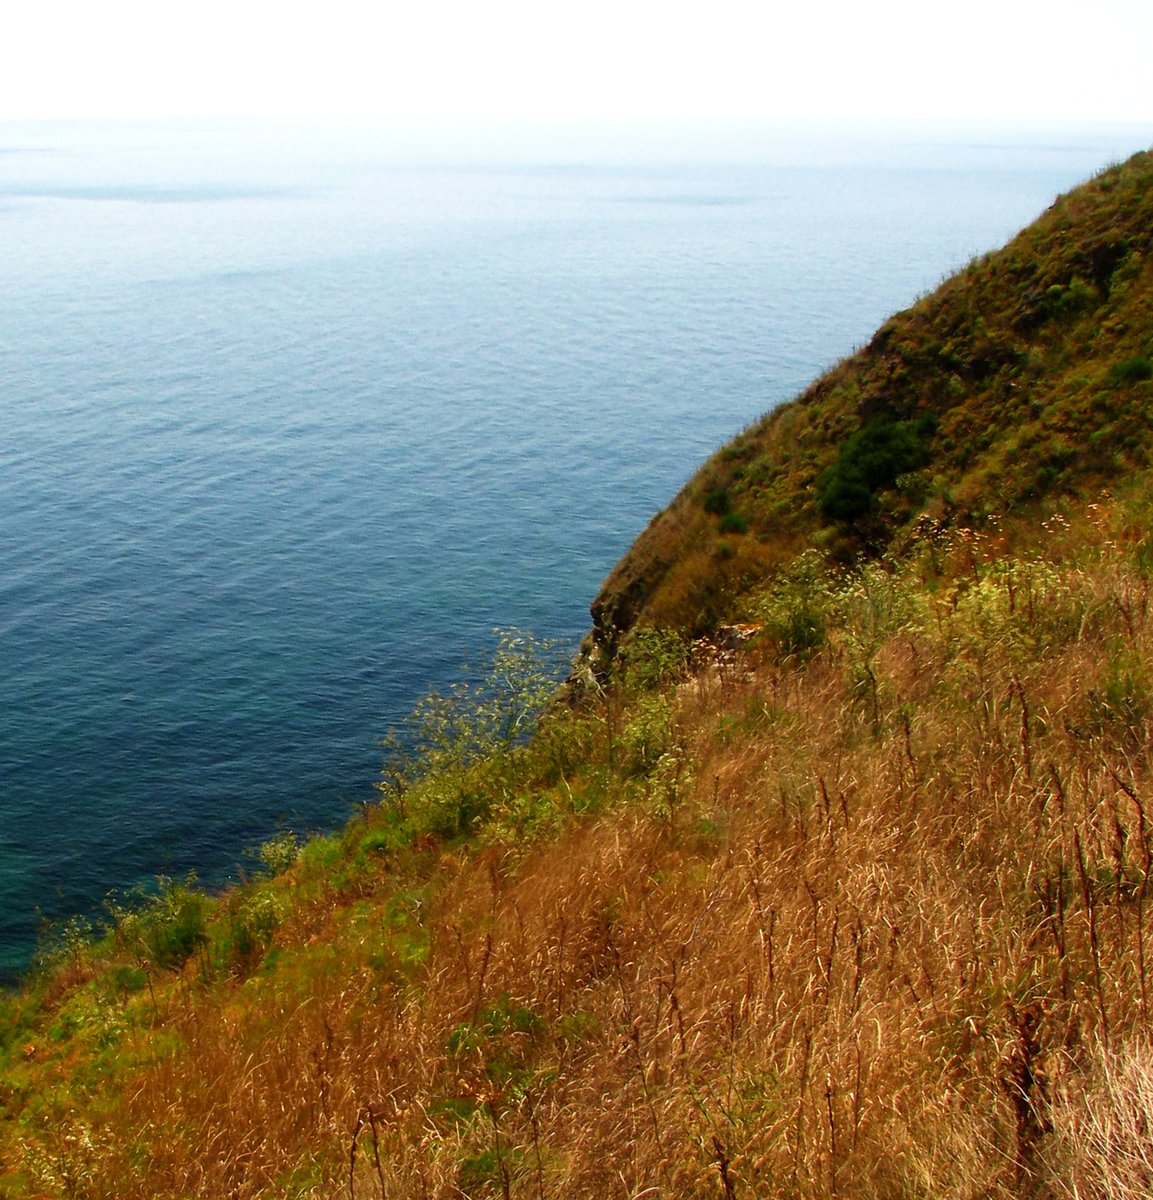 a lone man riding down the hillside next to the ocean